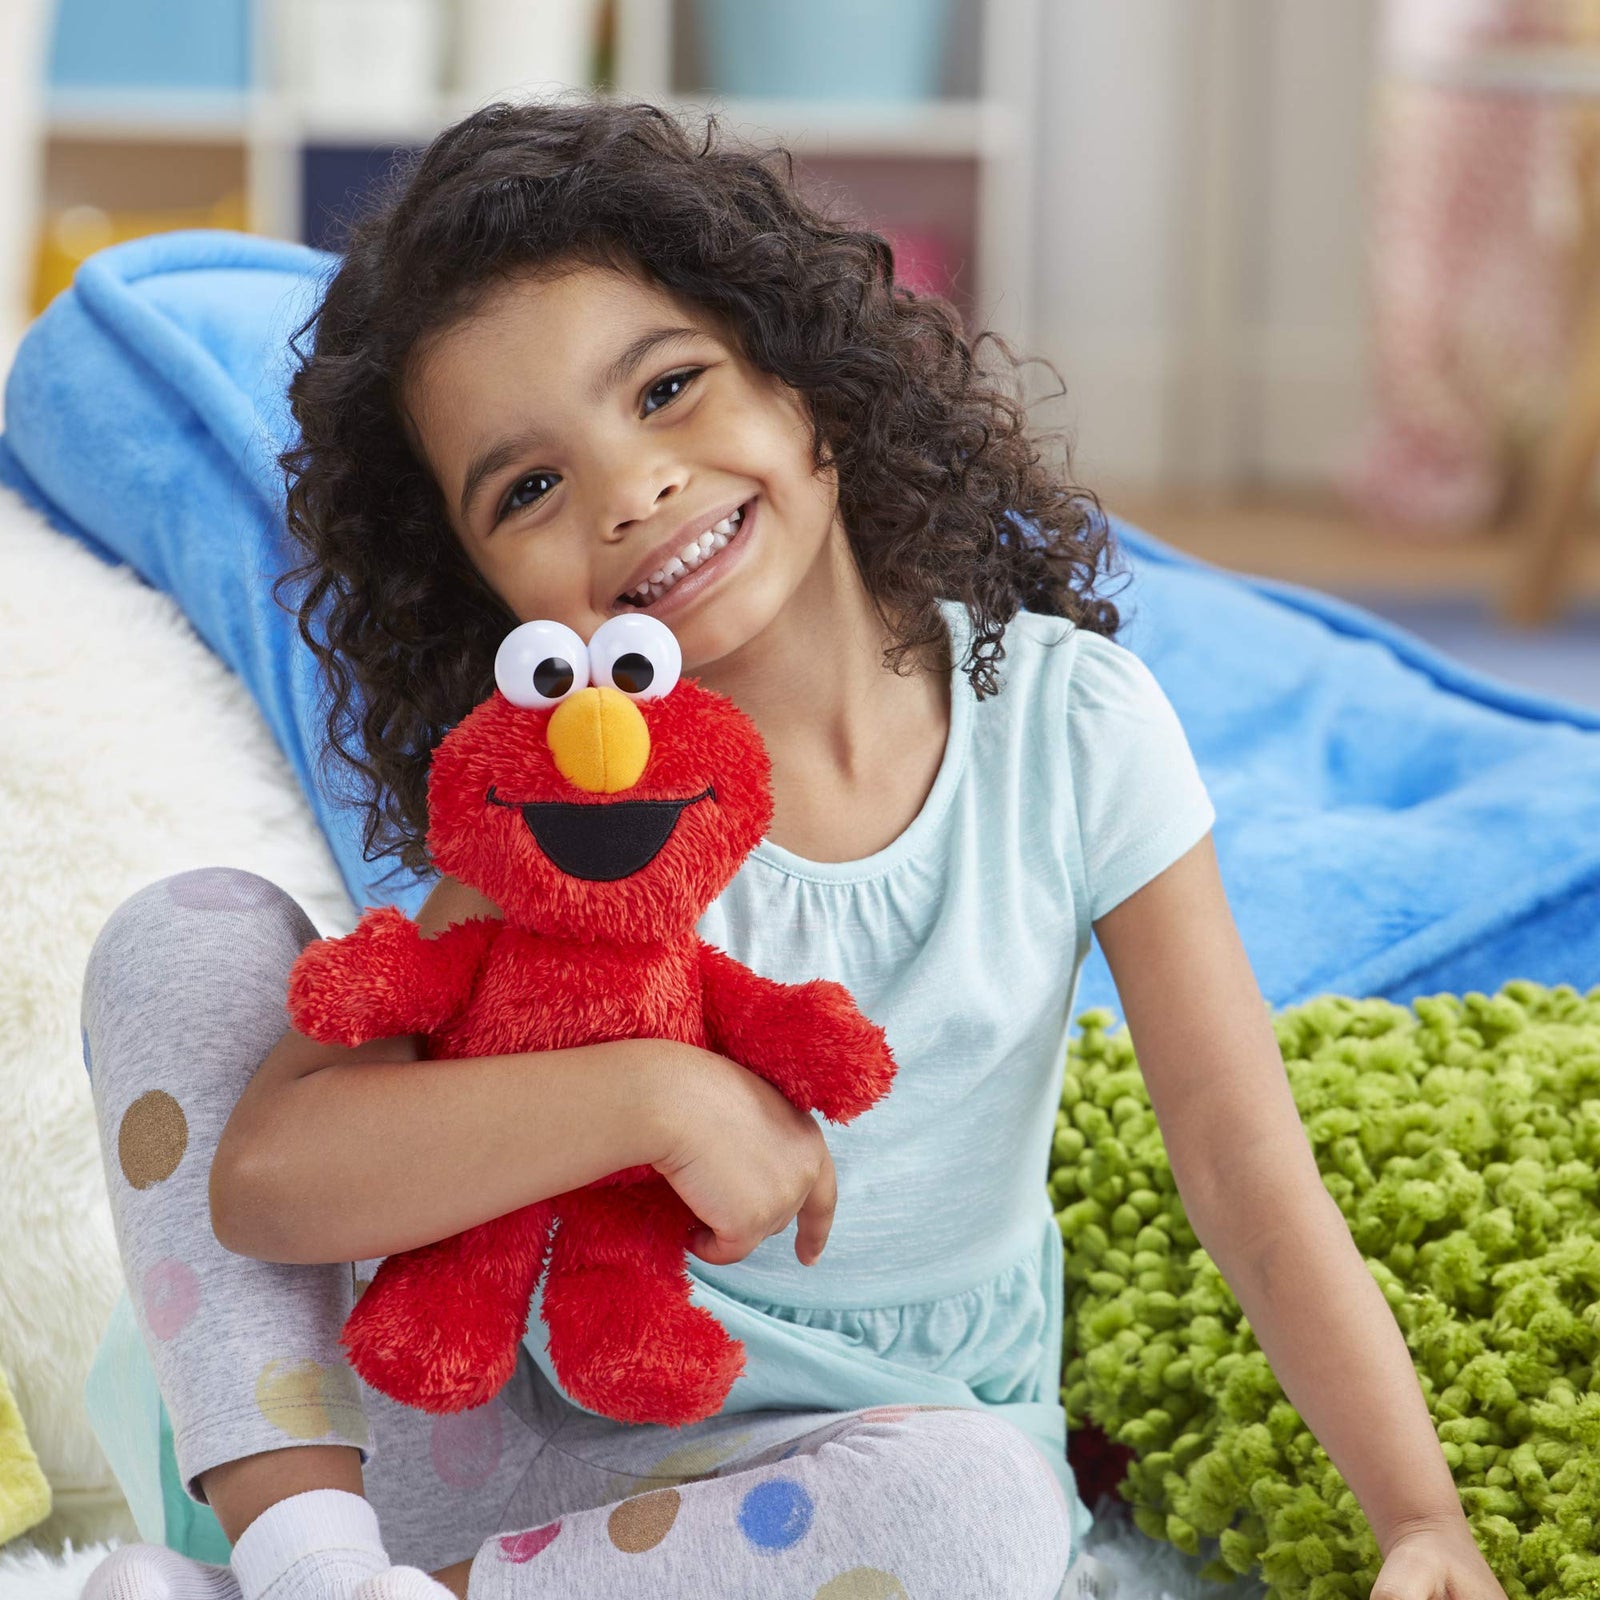 Sesame Street Little Laughs Tickle Me Elmo, Talking, Laughing 10-Inch Plush Toy for Toddlers, Kids 12 Months & Up